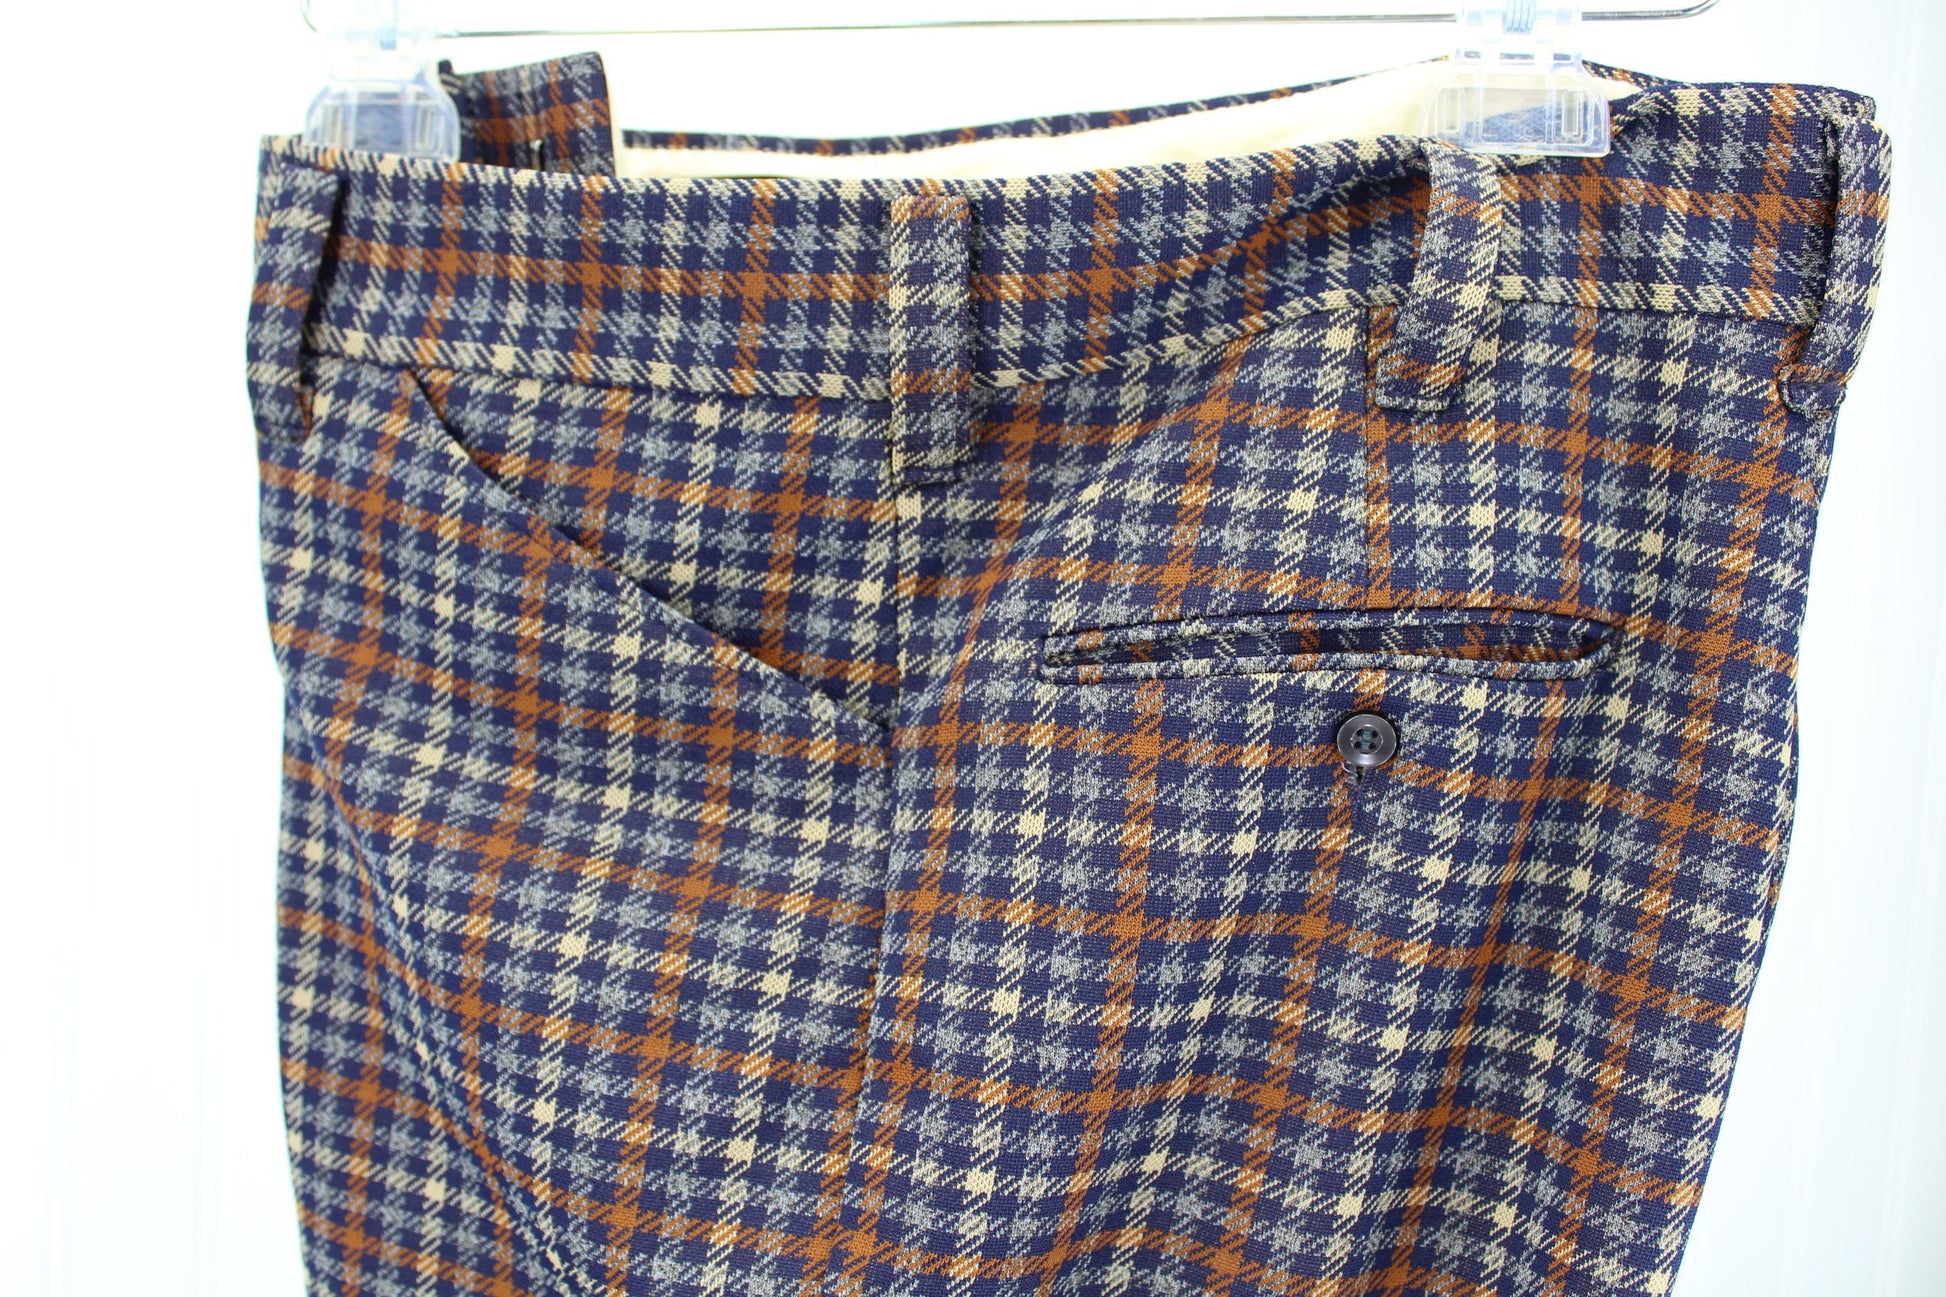 Puritan Men's Pants Trousers Vintage 1960s Blue Rust Houndstooth True Retro wallet pocket with button